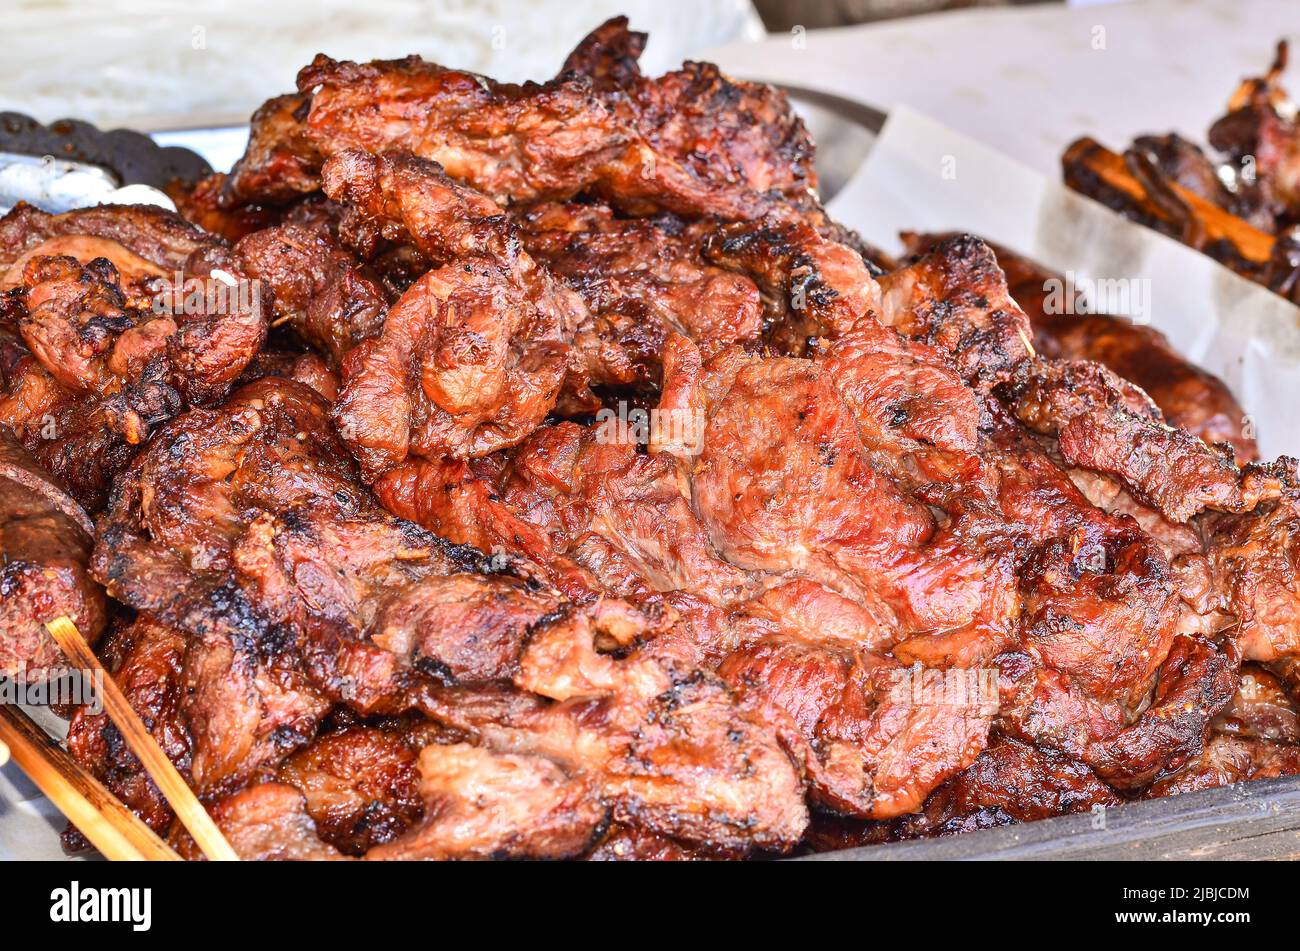 Grilled Pork on sell in market Stock Photo